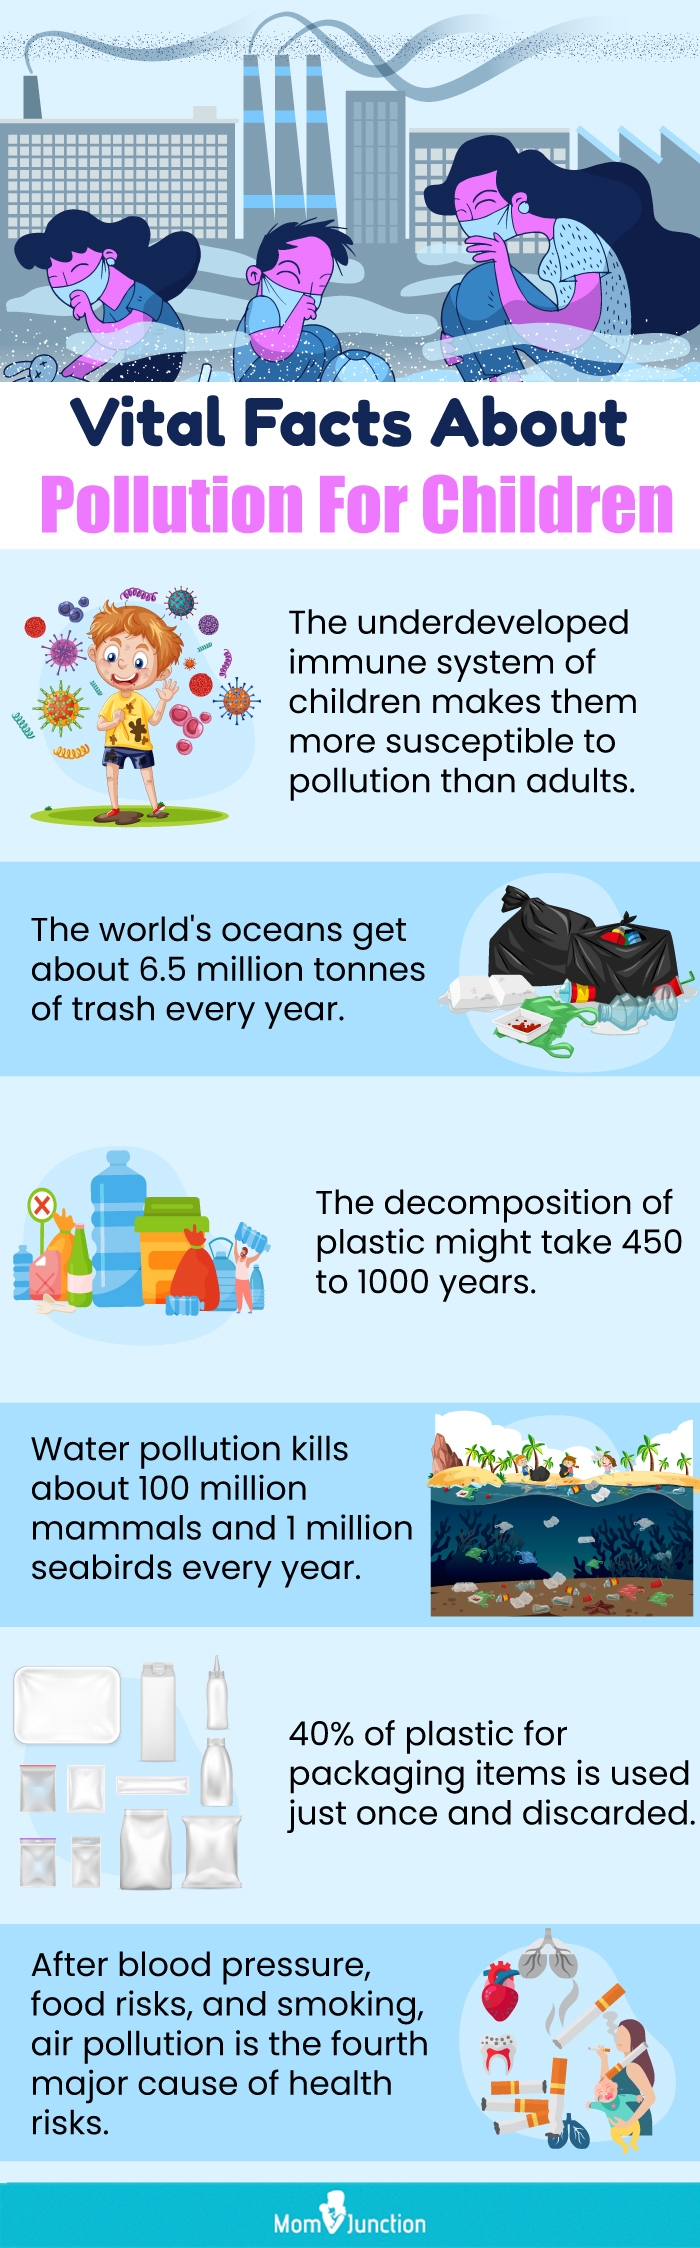 vital facts about pollution for children (infographic)